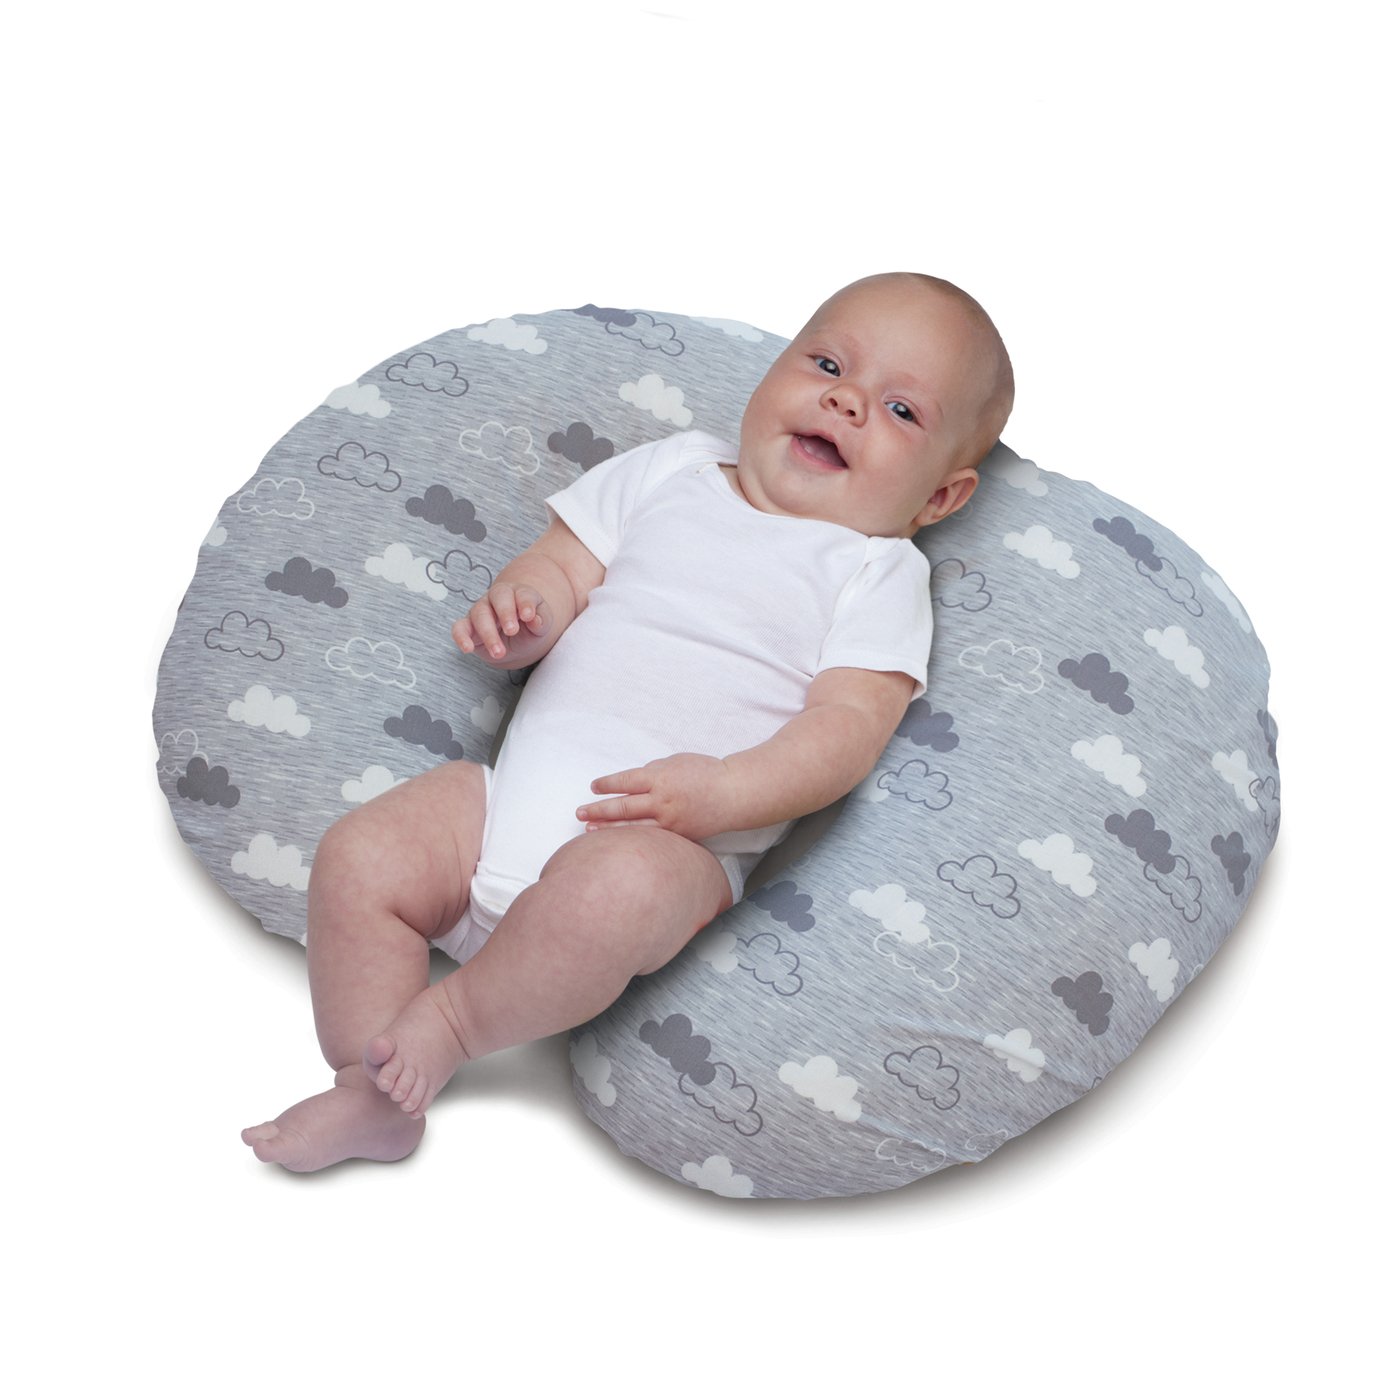 chicco pillow for baby